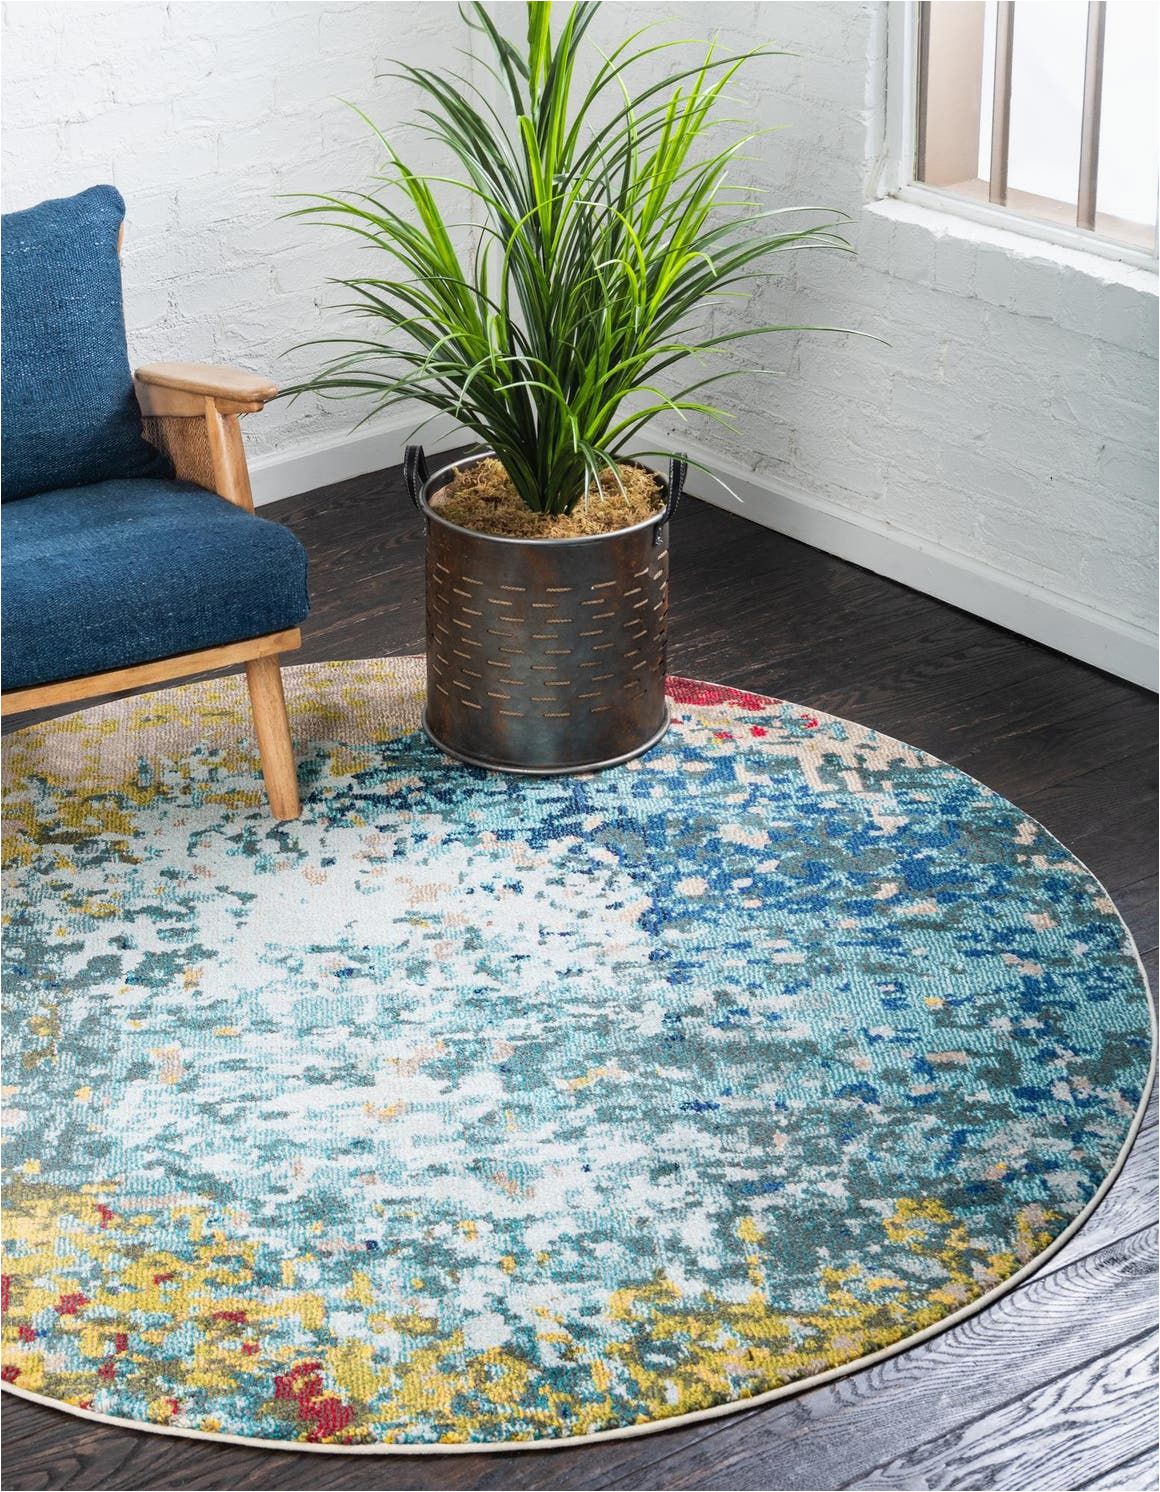 8 Ft Round Rug Blue Hyacinth Blue 6 Ft Round area Rug In 2020